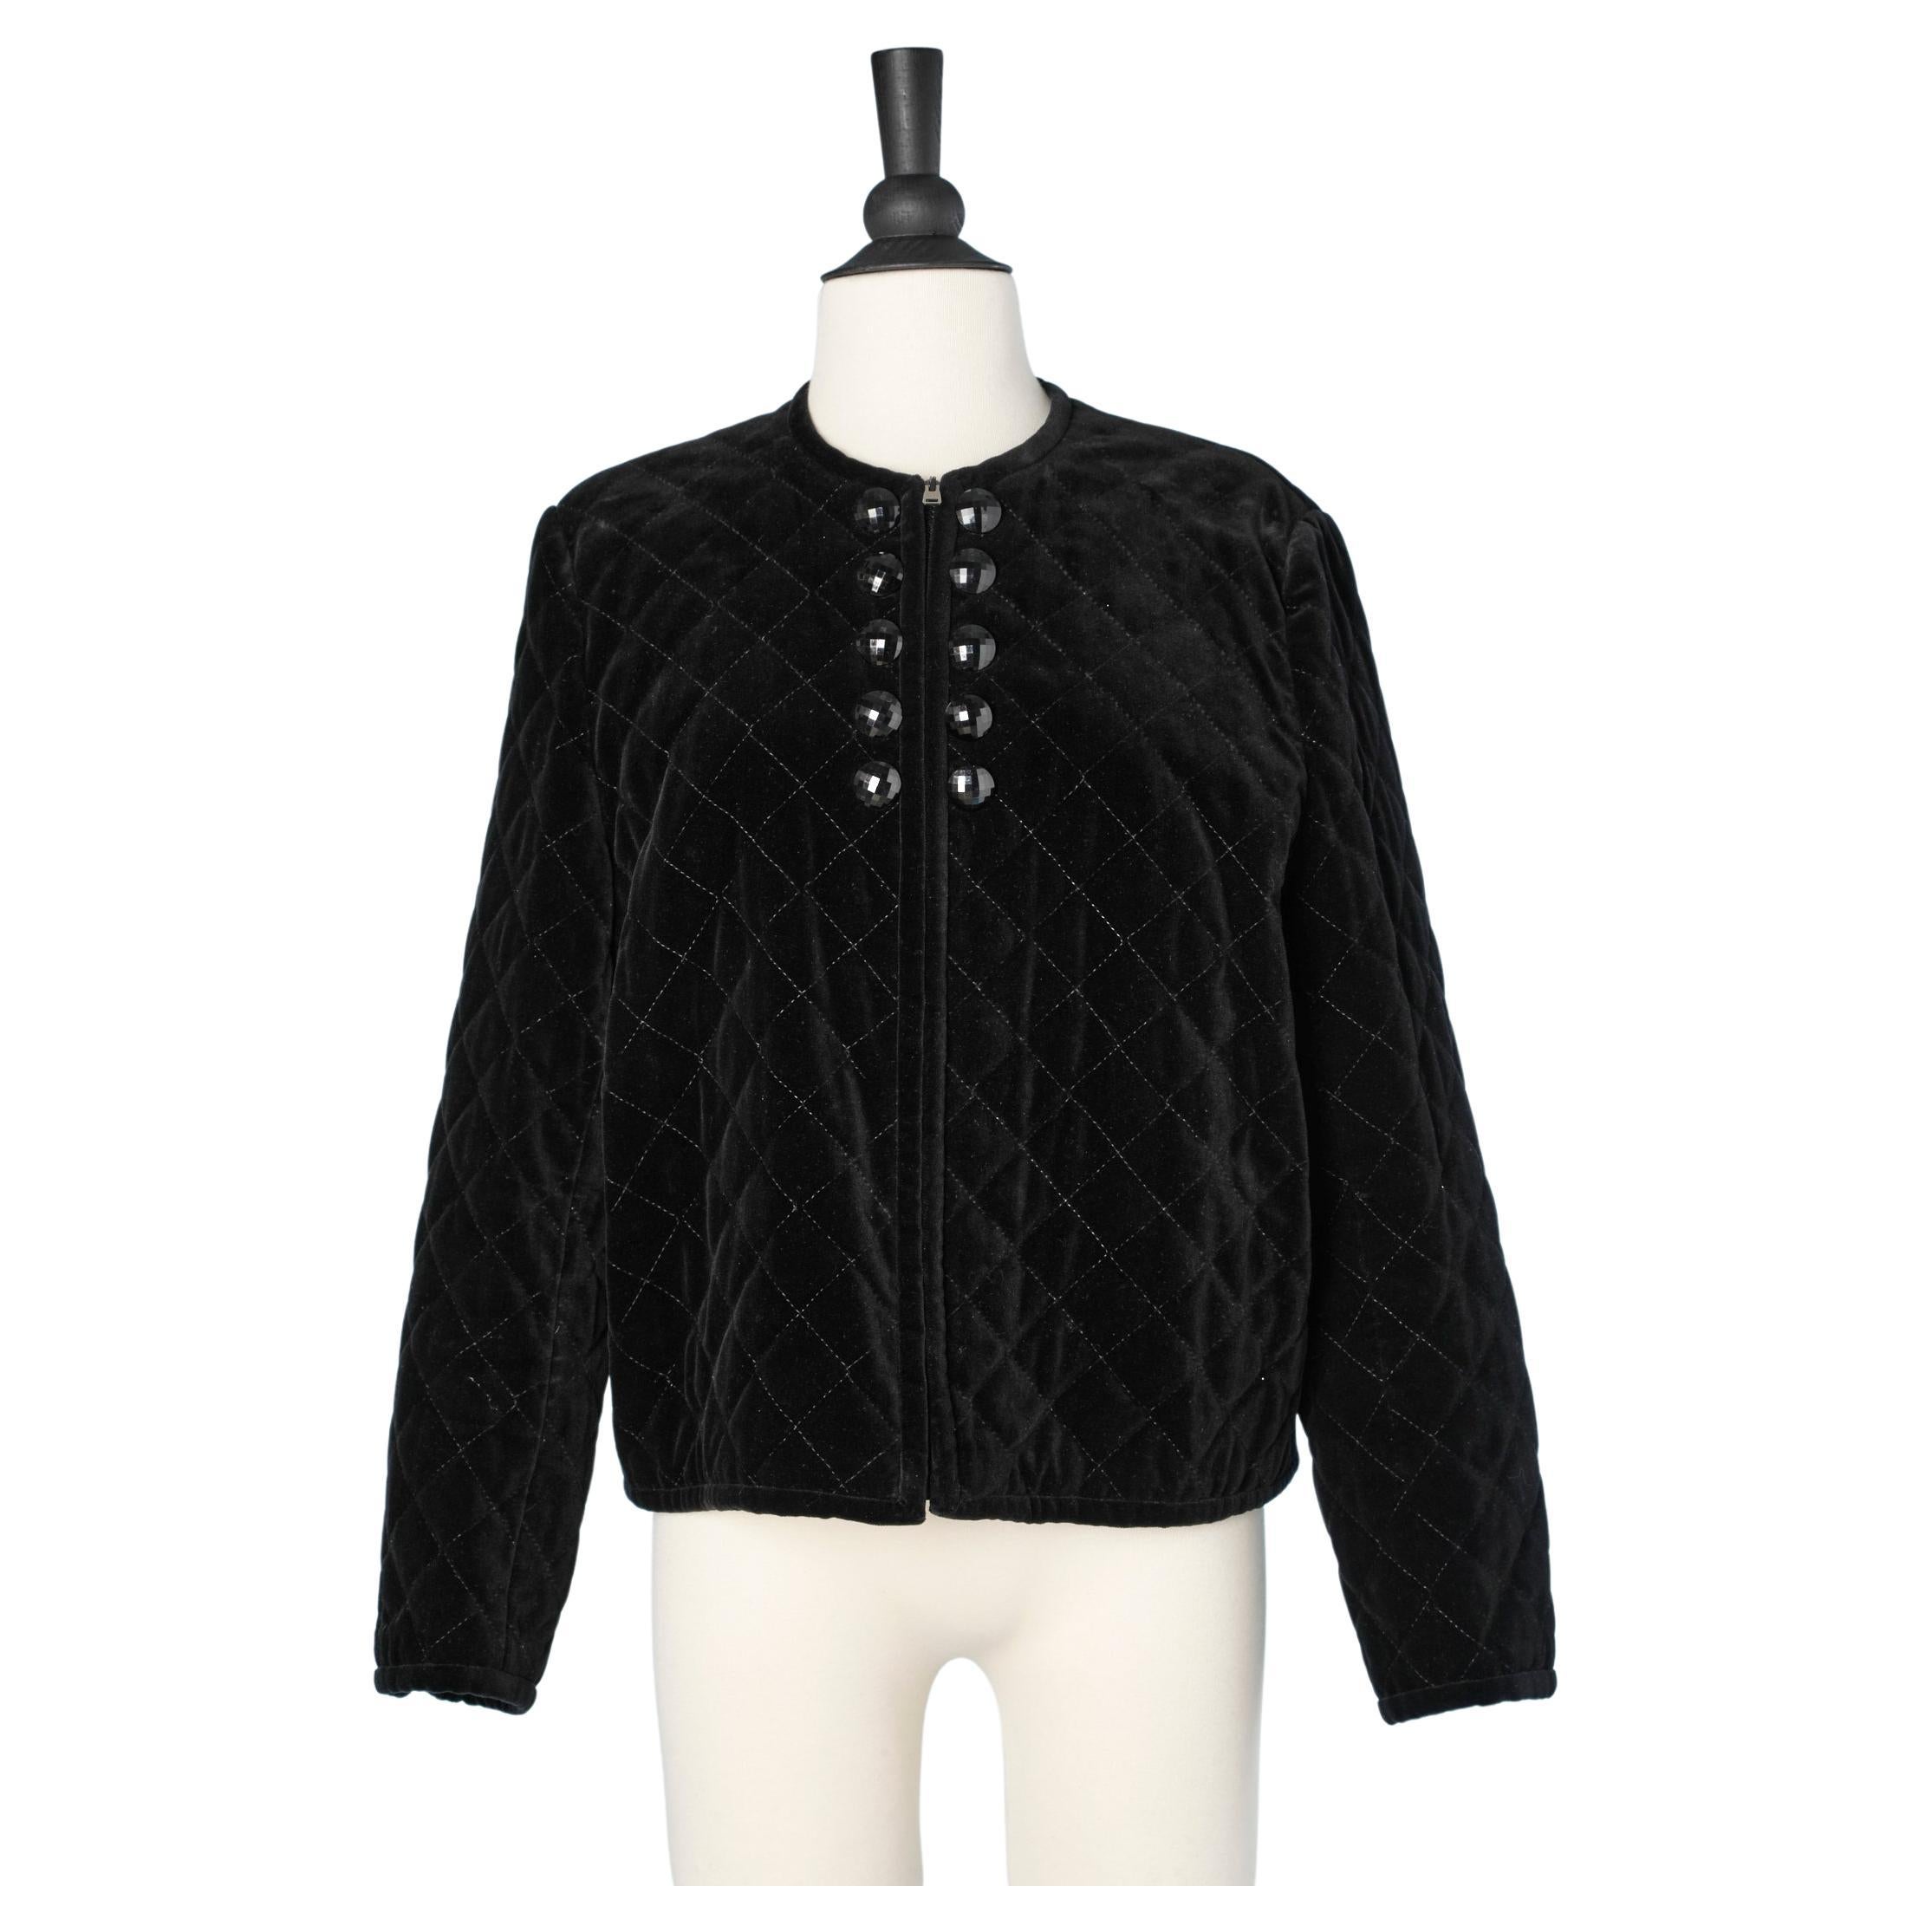 Black quilted velvet jacket with decorative buttons Valentino Boutique 